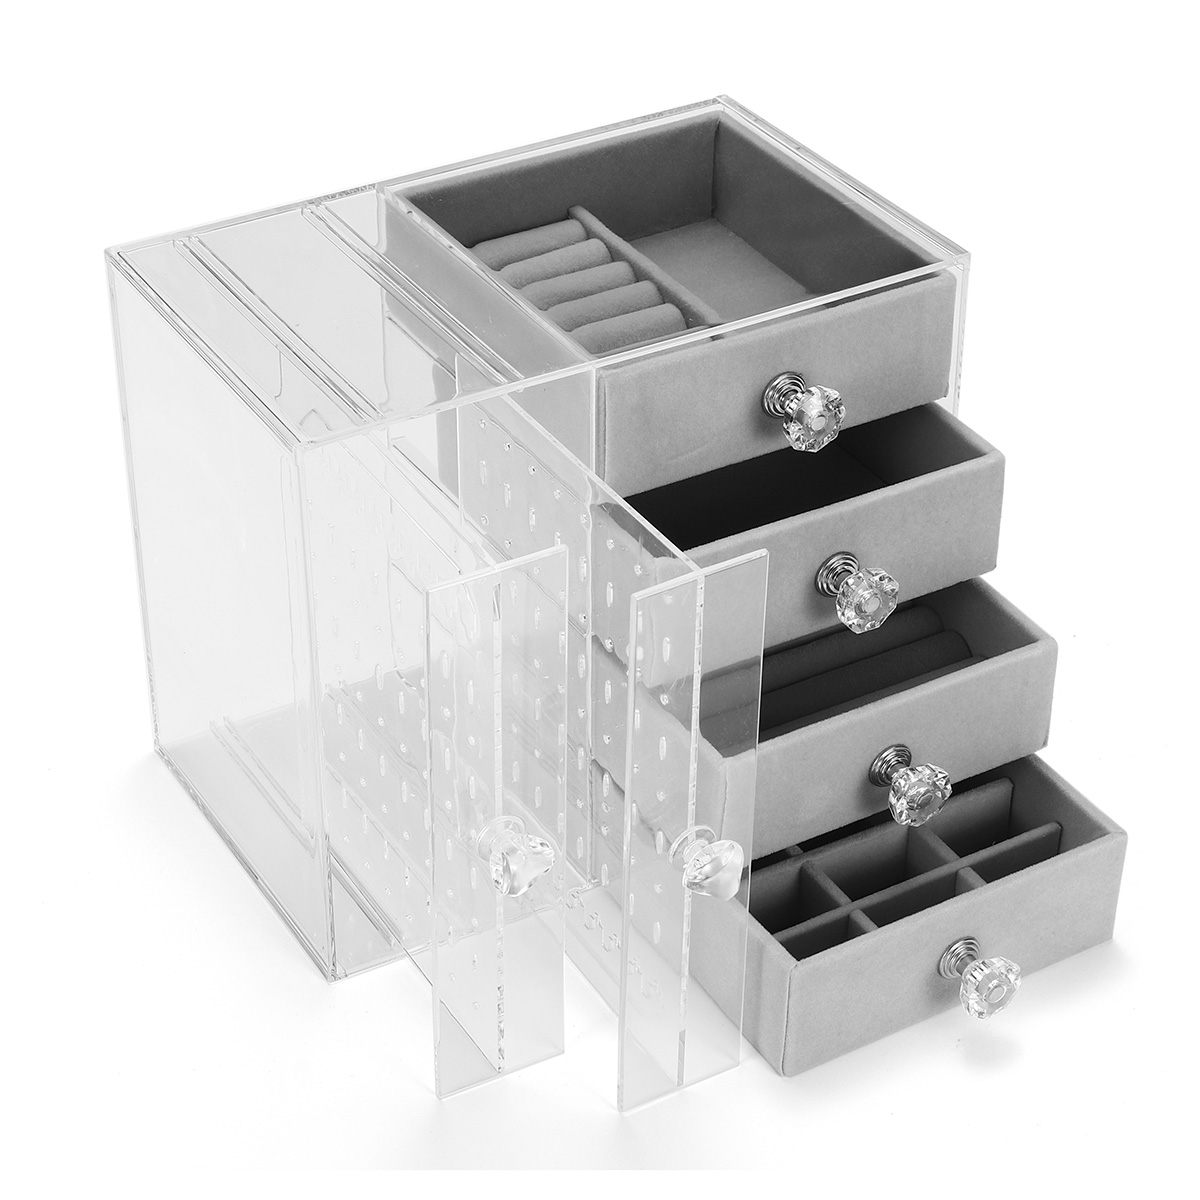 Find Acrylic Transparent Jewelry Boxes Organizers Earrings Display Stand Storage Box Drawers Design Earrings Jewelry Organizer For Home for Sale on Gipsybee.com with cryptocurrencies